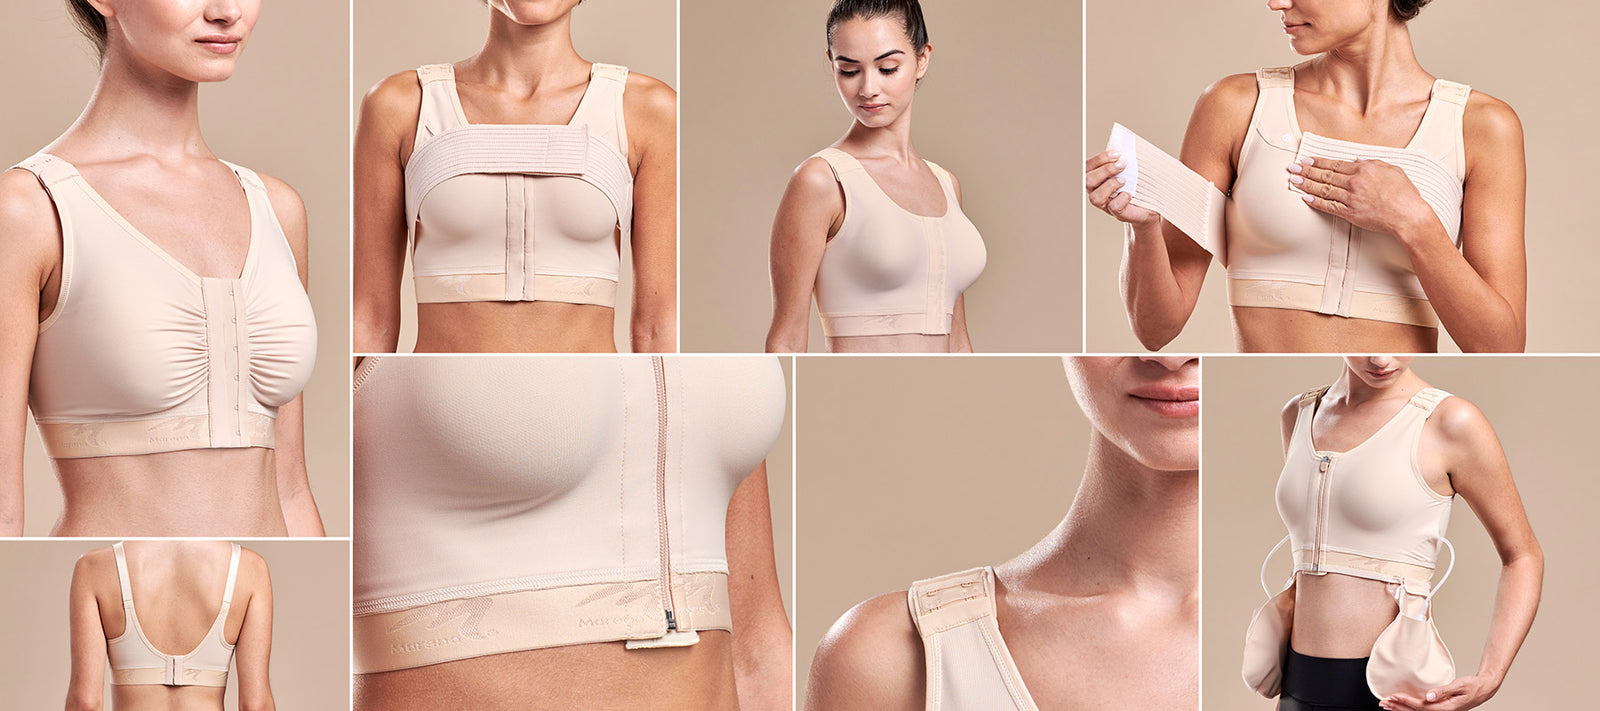 Post Surgical Bra  Surgical Bra After Breast Reduction - The Marena Group,  LLC